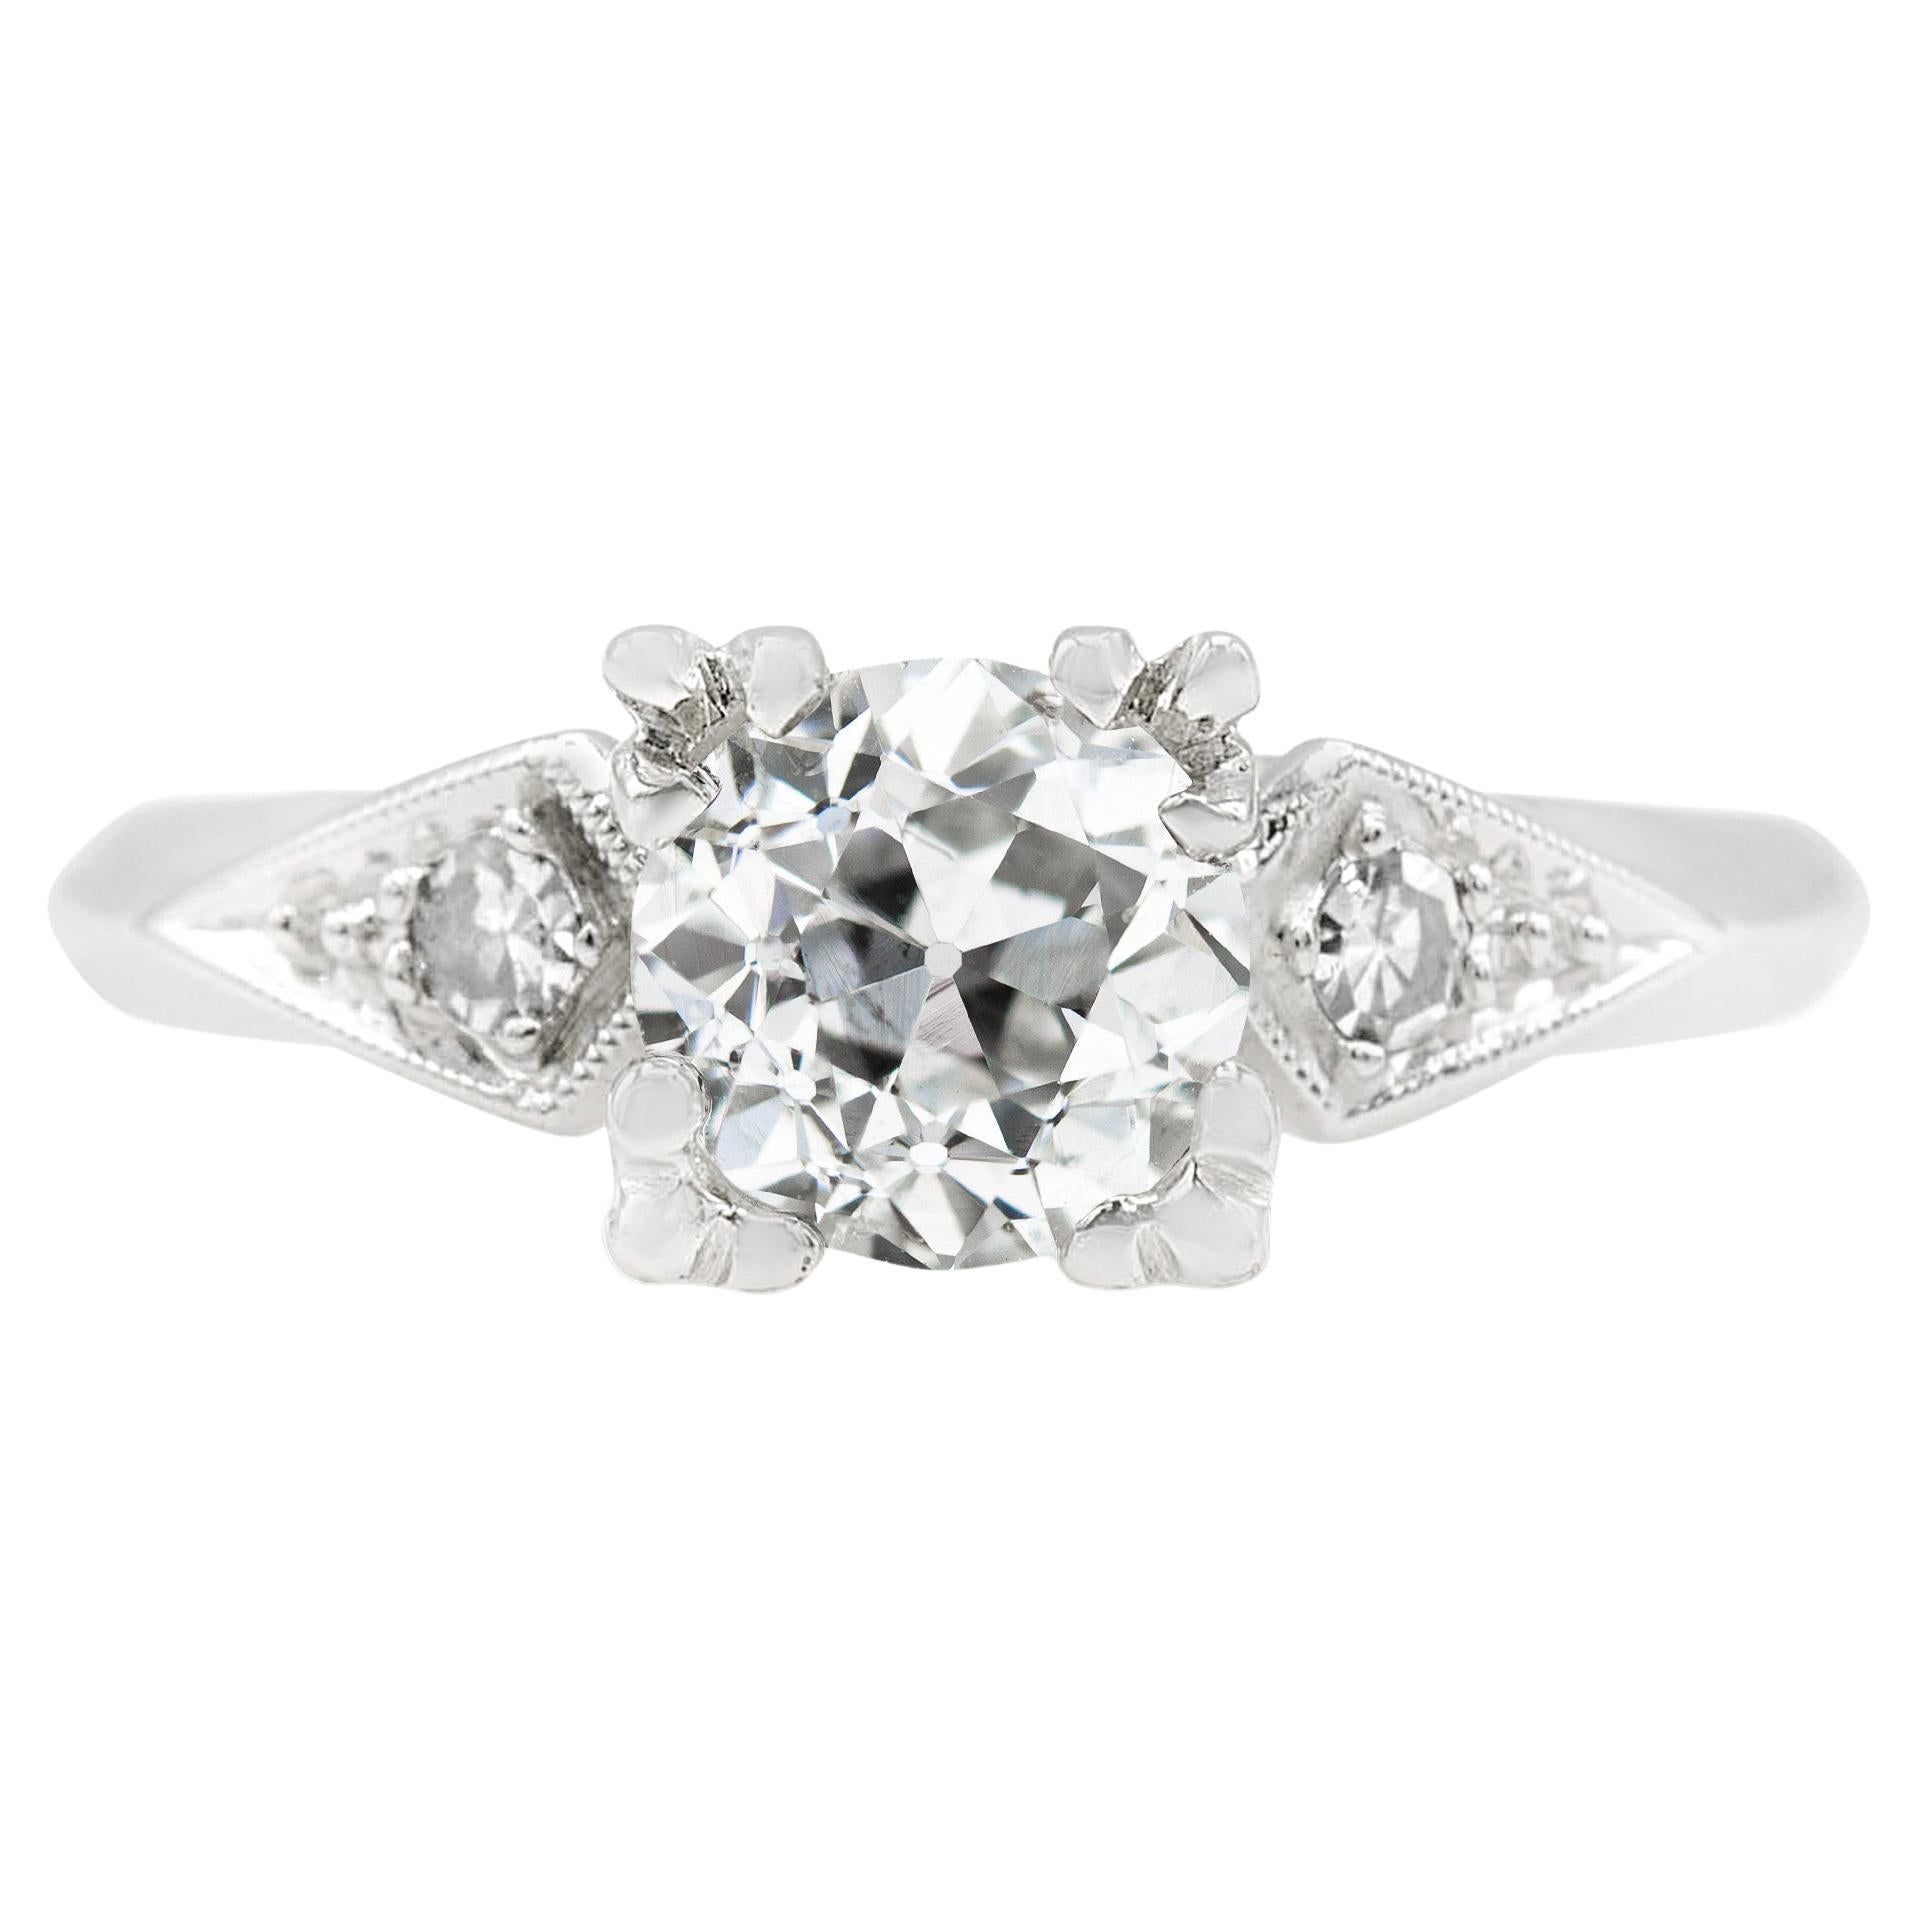 Art Deco GIA Certified 0.88 Ct. Diamond Engagement Ring  E SI2 in Platinum